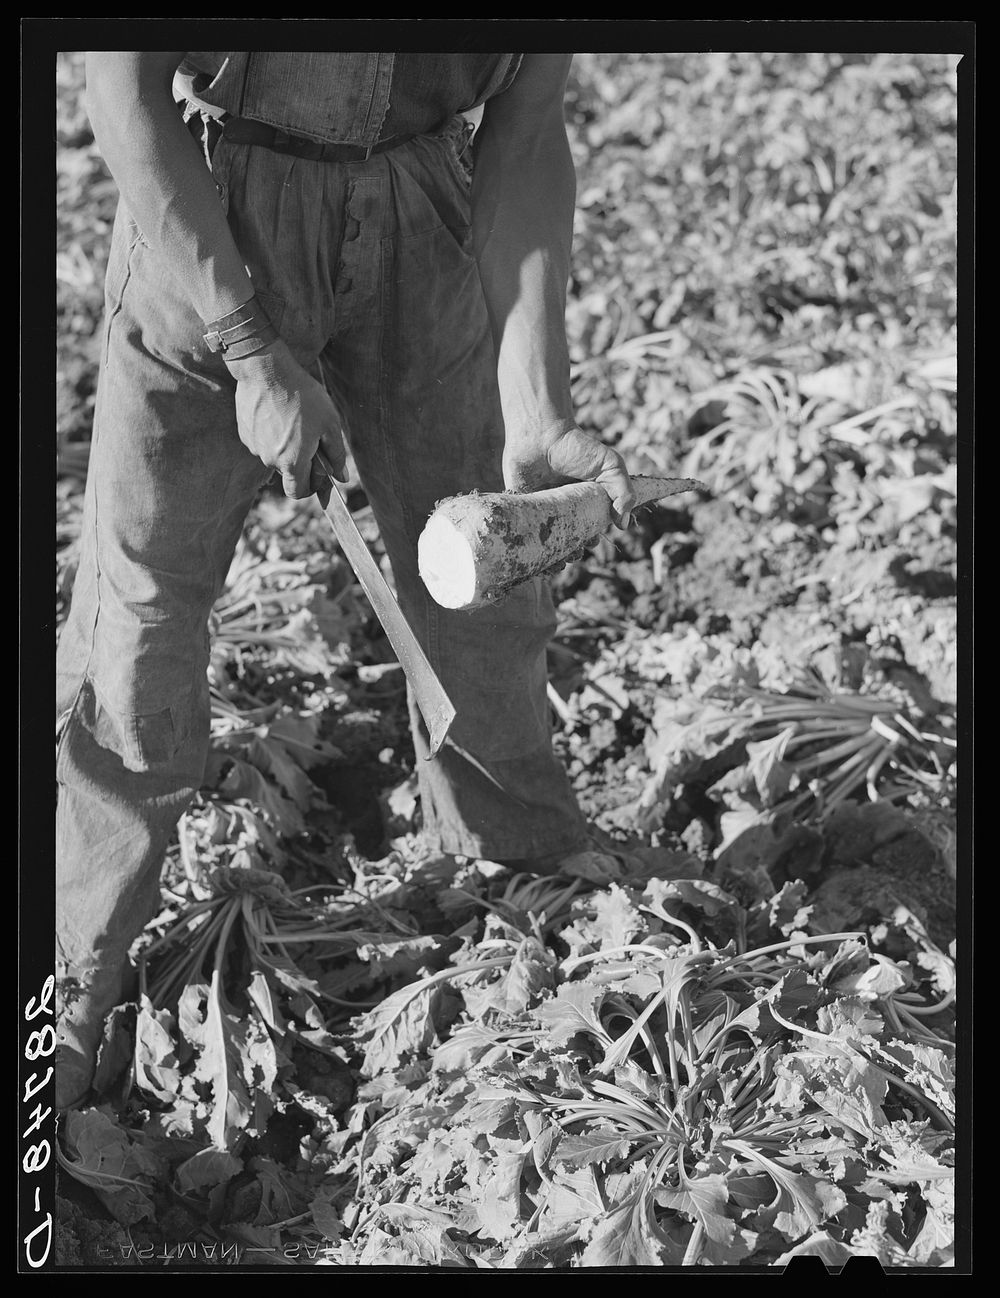 Sugar beet after topping. Adams County, Colorado. Sourced from the Library of Congress.